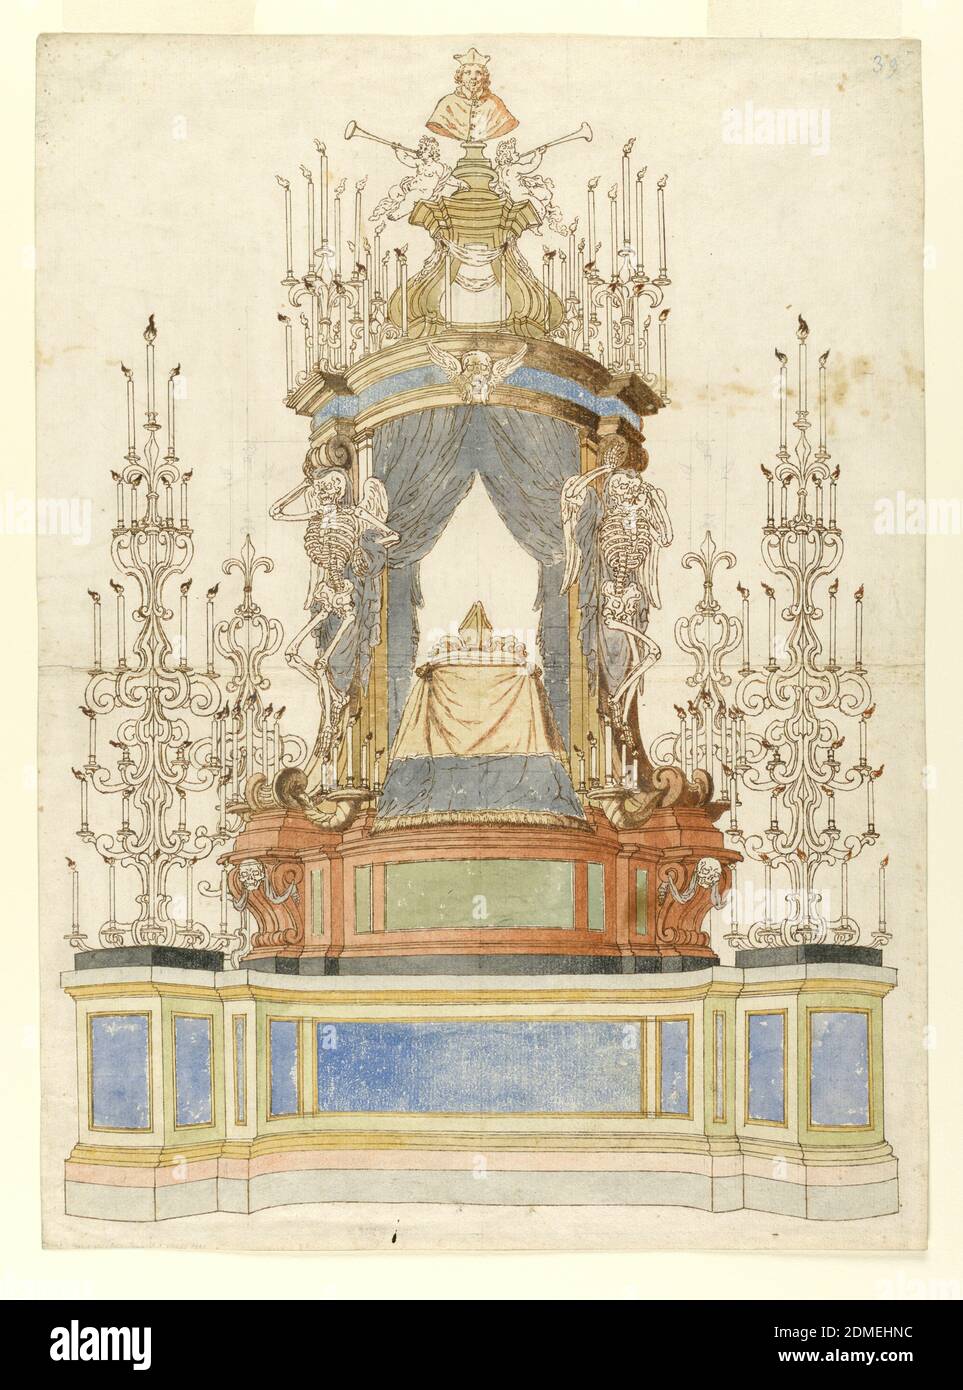 Giorgio Bolognetti, Bishop of Rieti, Giorgio Bolognetti, Bishop of Rieti, Italian, 1595 - 1680, Sebastiano Cipriani, Italian, 1660 - 1740, Pen and brown ink, watercolor, black chalk on laid paper, A baldachin mounted on a raised platform between two large candelabra, ornamented with fleur-de-lis, holding lit candles., Italy, Italy, 1686, architecture, Drawing Stock Photo